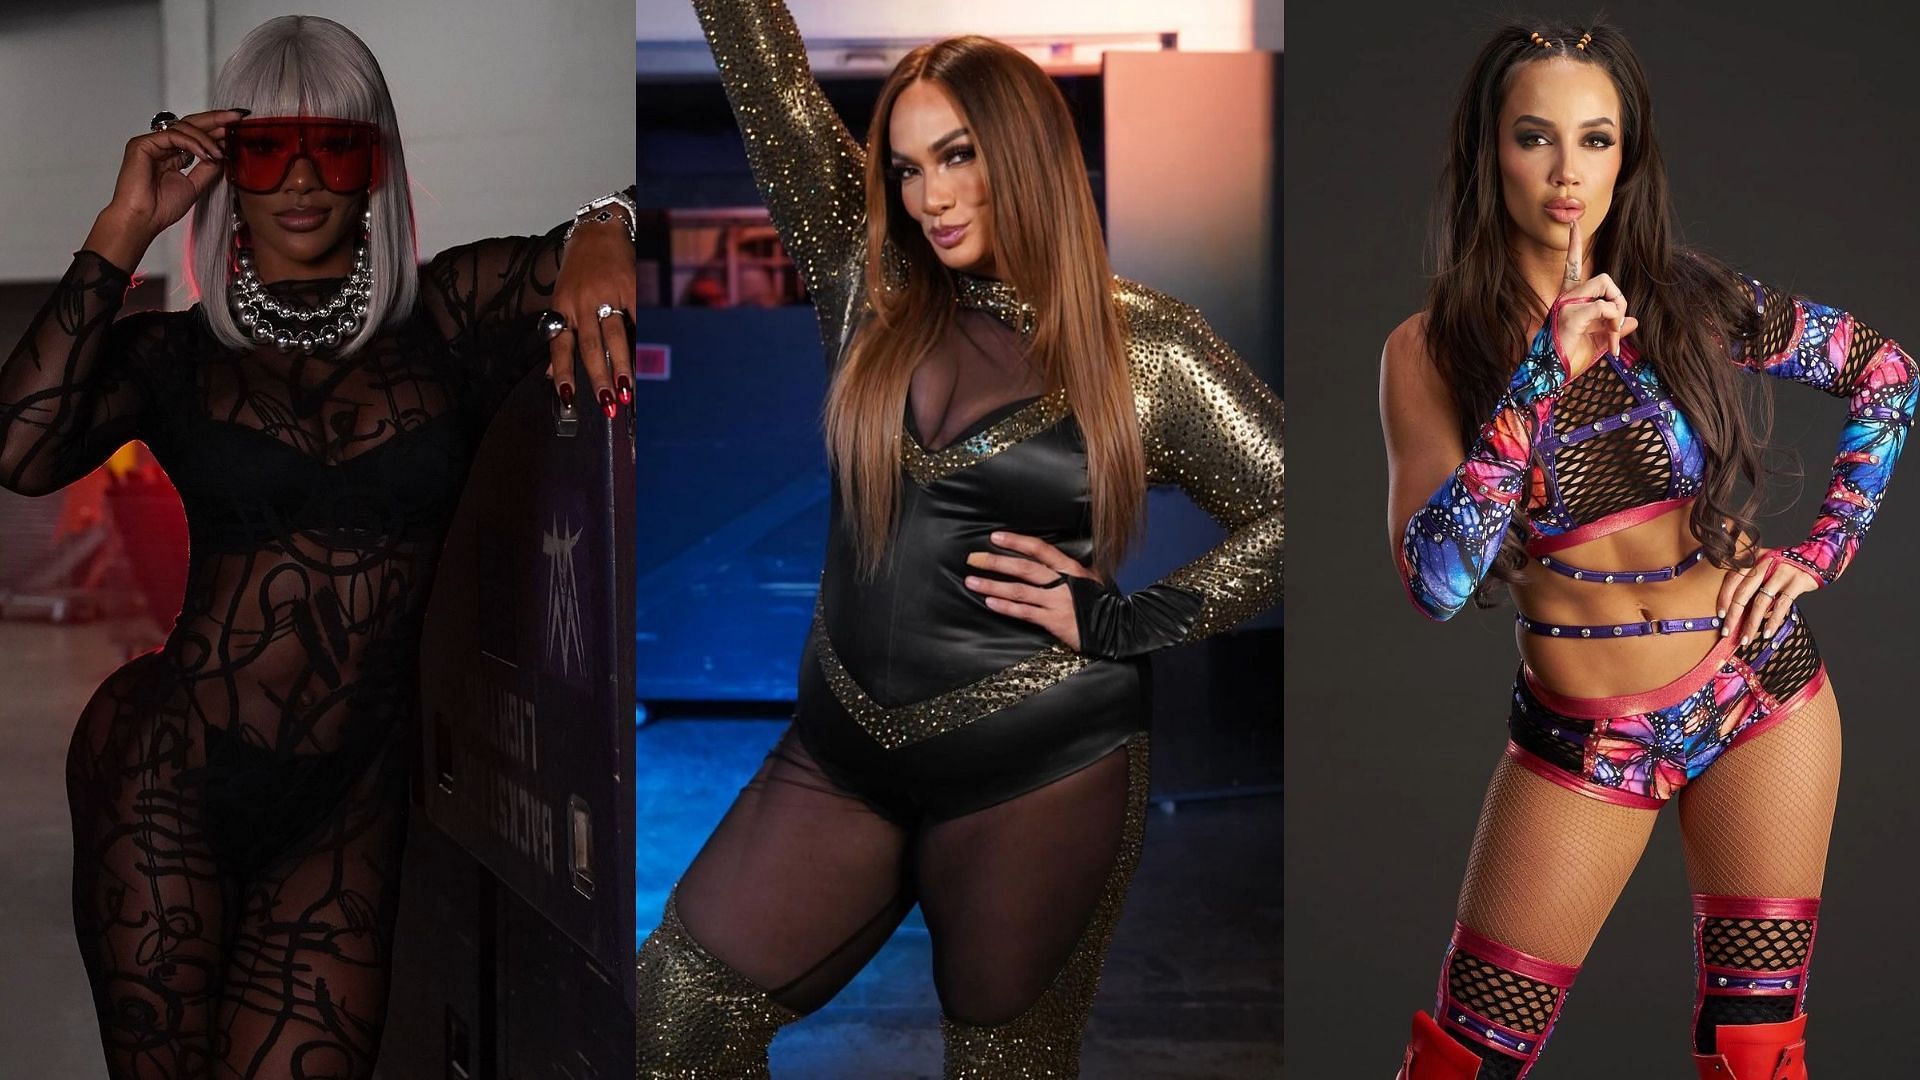 Jade Cargill, Nia Jax, and Chelsea Green(From left to right)